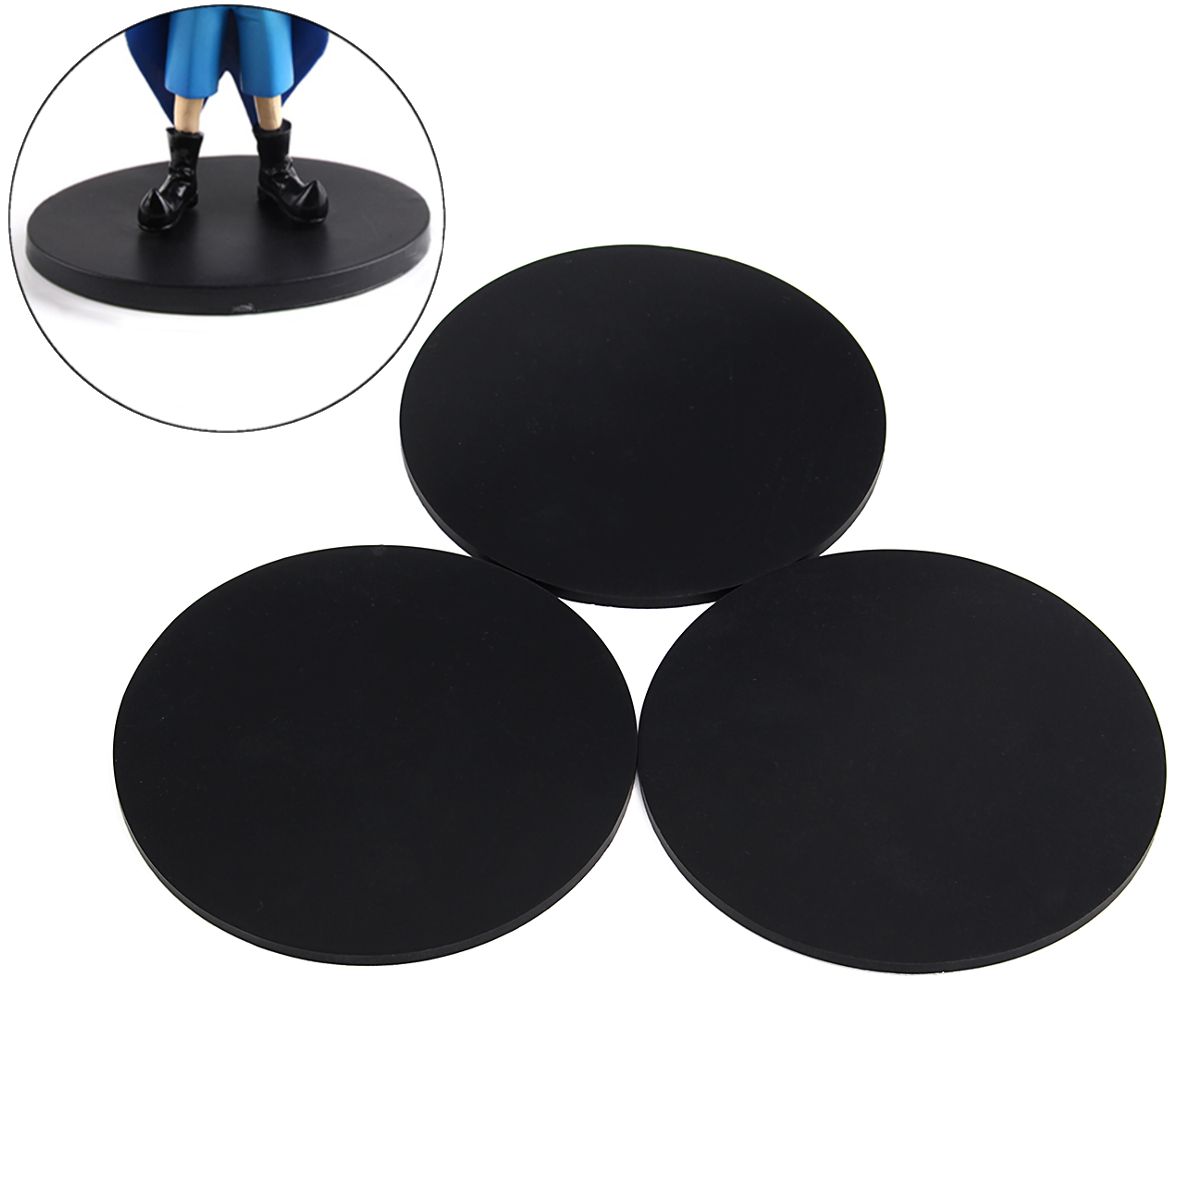 3Pcs-120mm-Round-Black-Silicone-Oval-Model-Bases-Support-for-Wargames-Table-Games-1268421